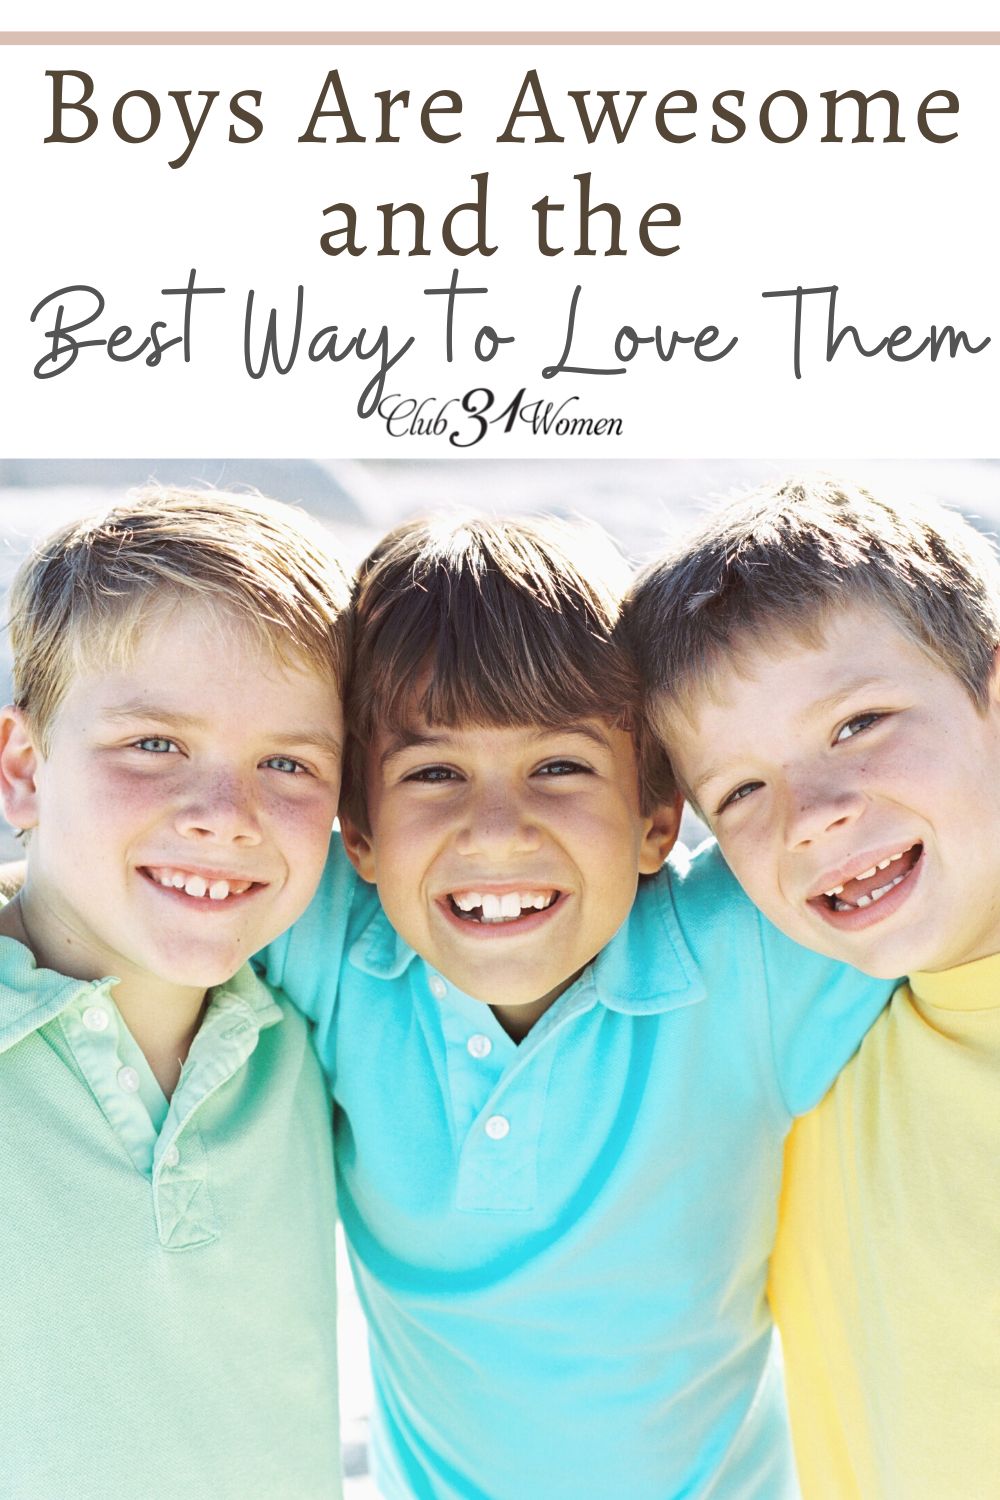 Boys are awesome! There's so much to appreciate in our sons and something to know about loving them. Some really GREAT advice here - from a mom who knows! via @Club31Women